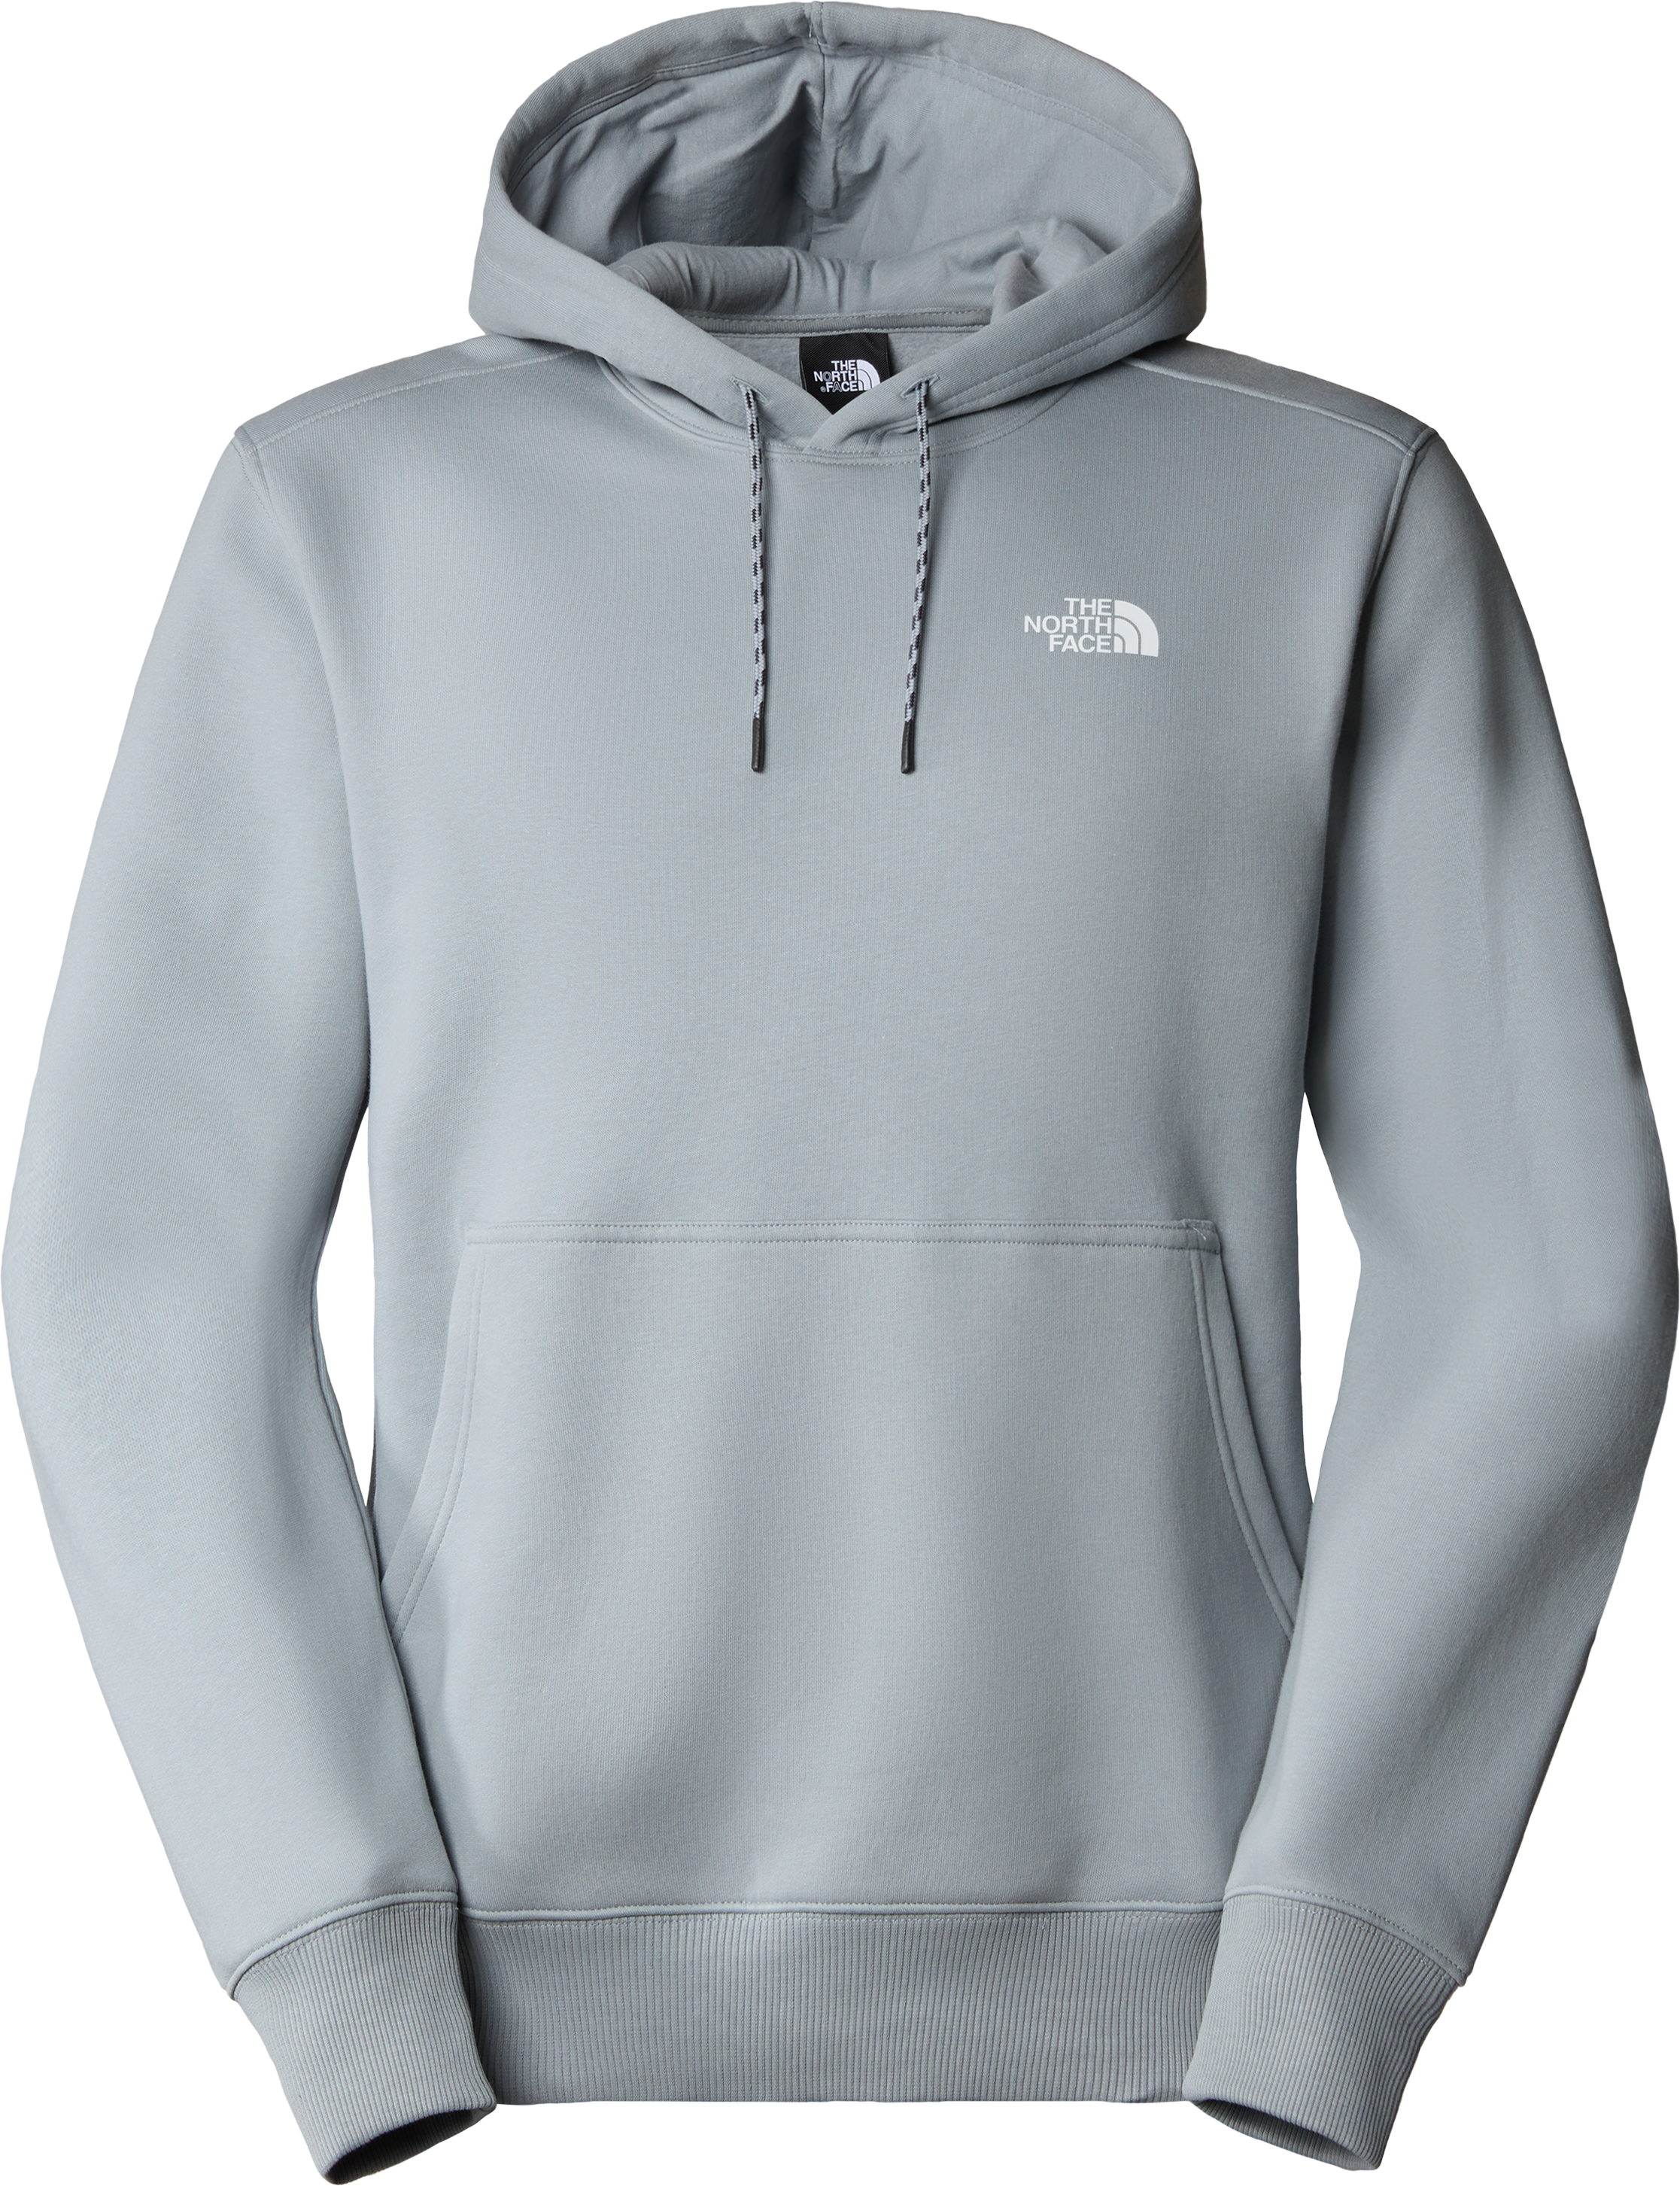 The North Face The North Face Men's Outdoor Graphic Hoodie Monument Grey XL, Monument Grey